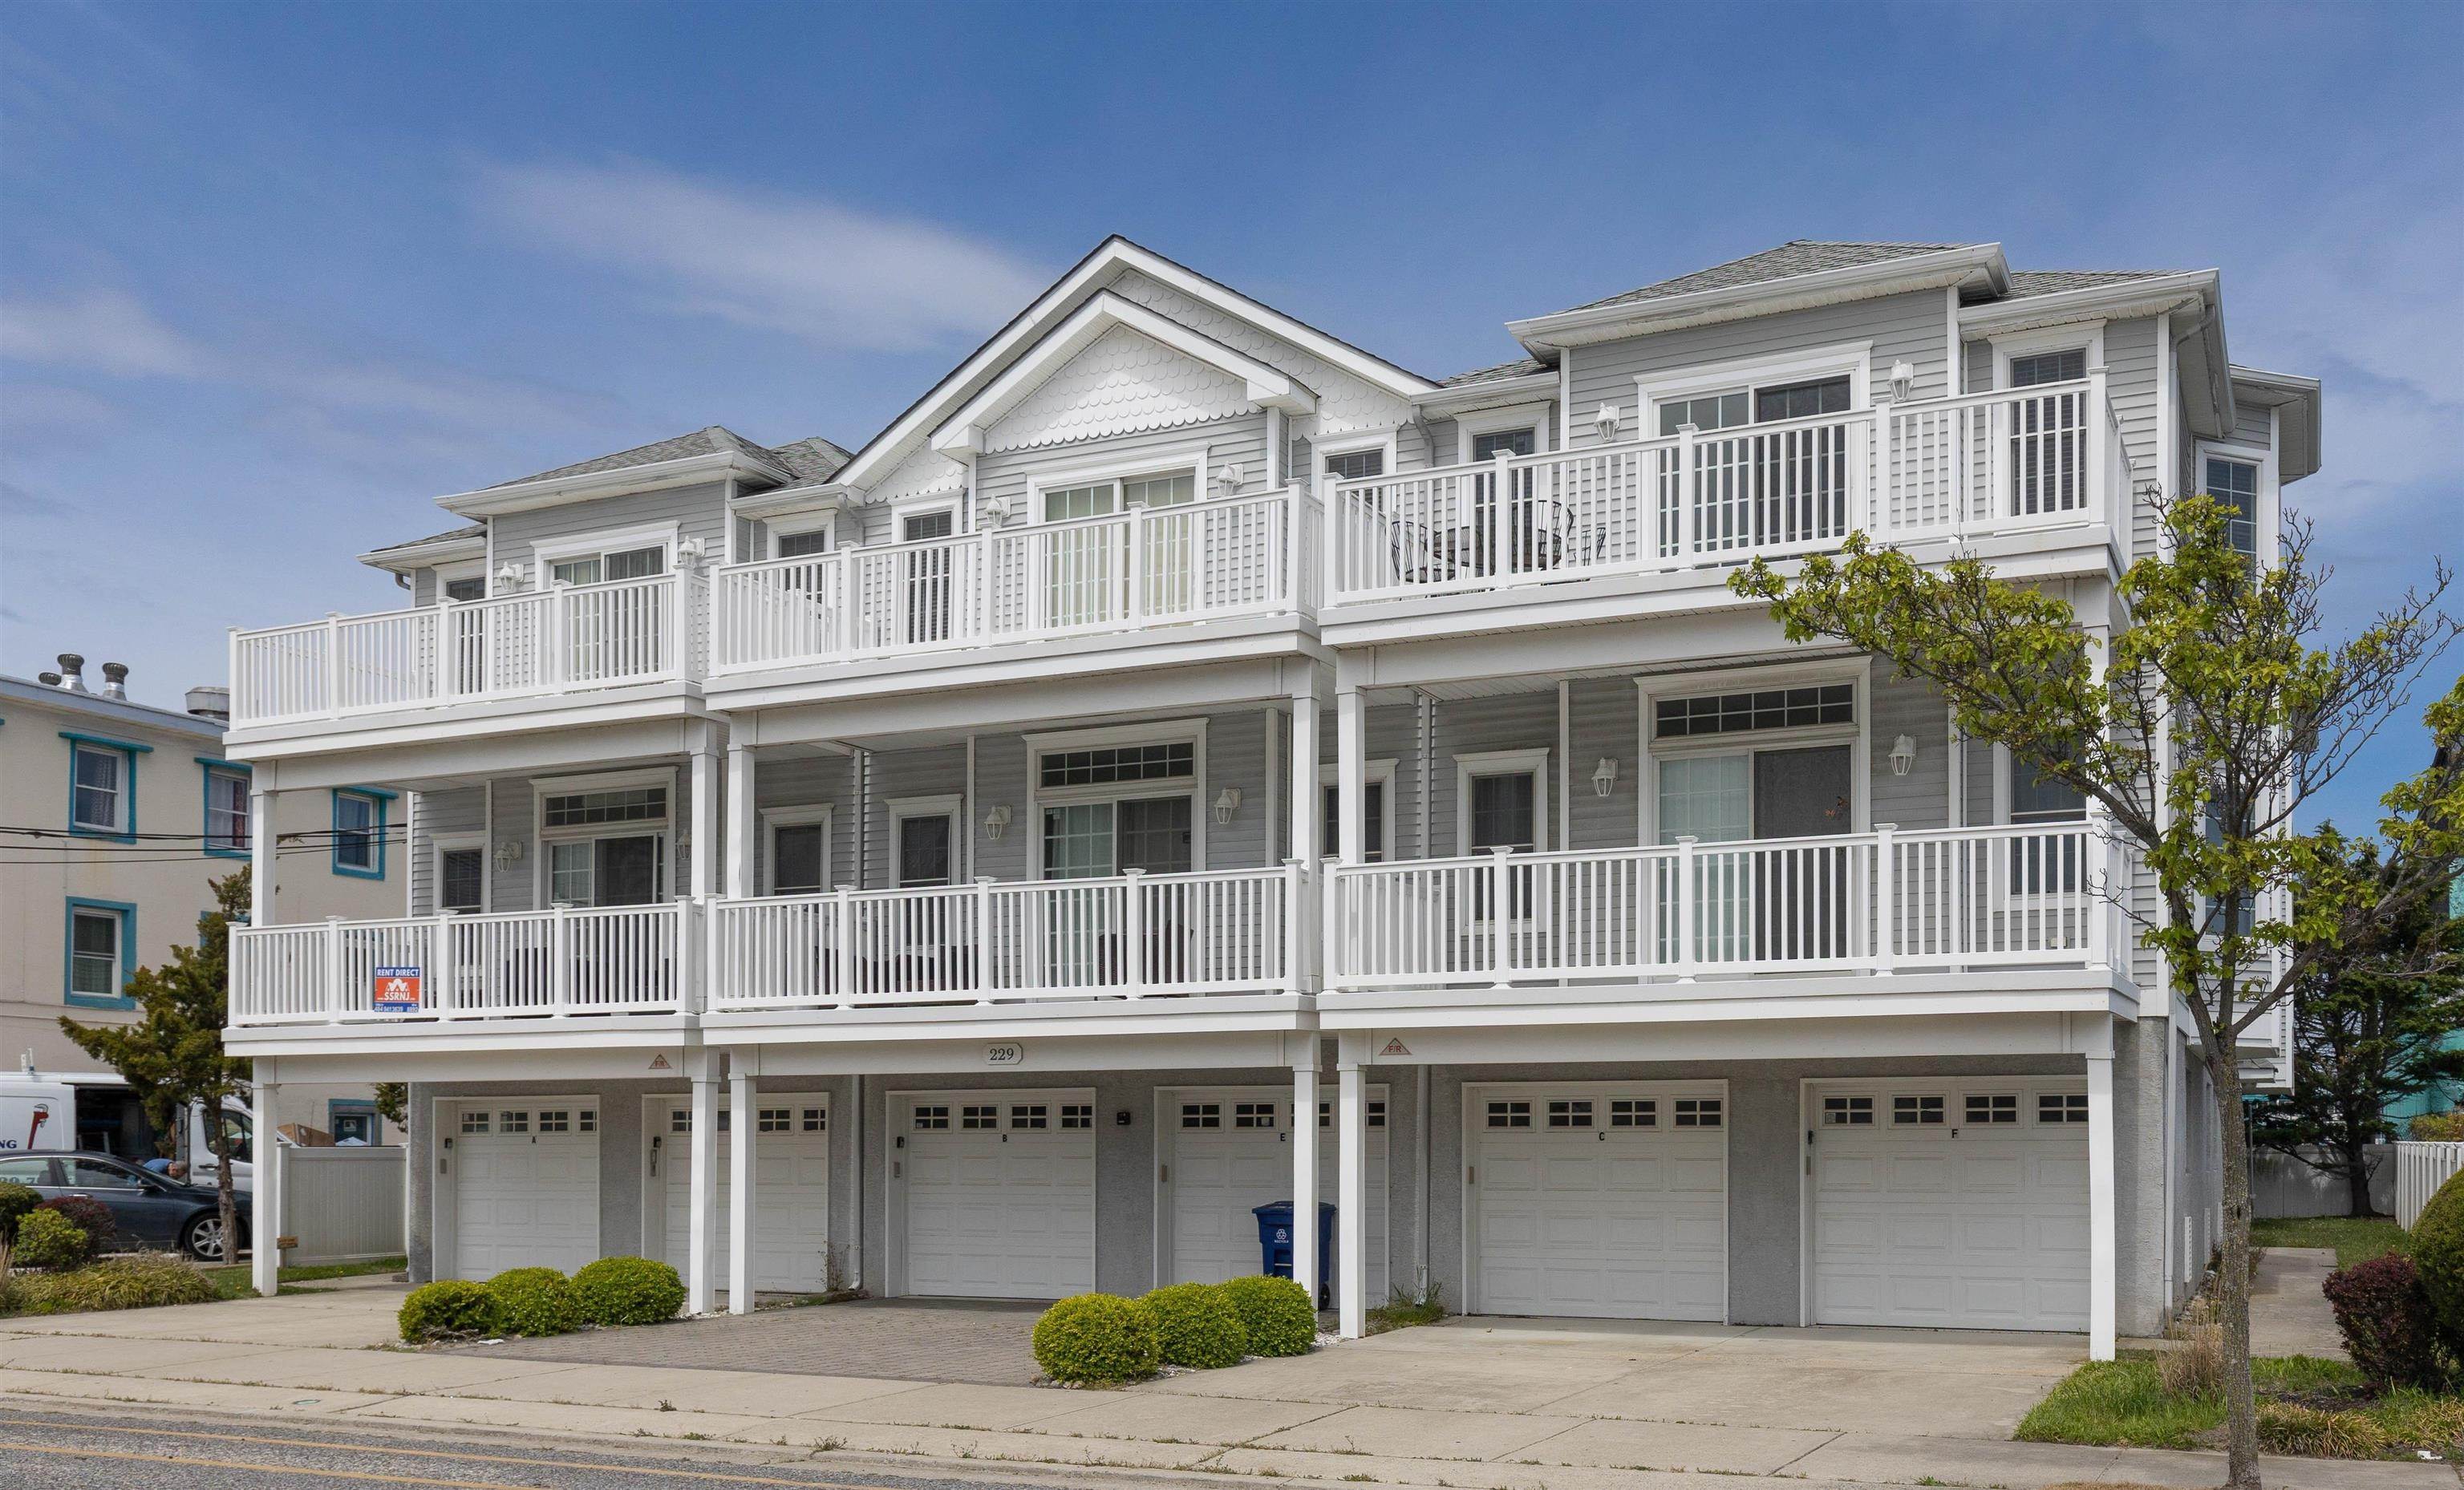 1. Condominiums for Sale at 229 E Lincoln Avenue Wildwood, New Jersey 08260 United States